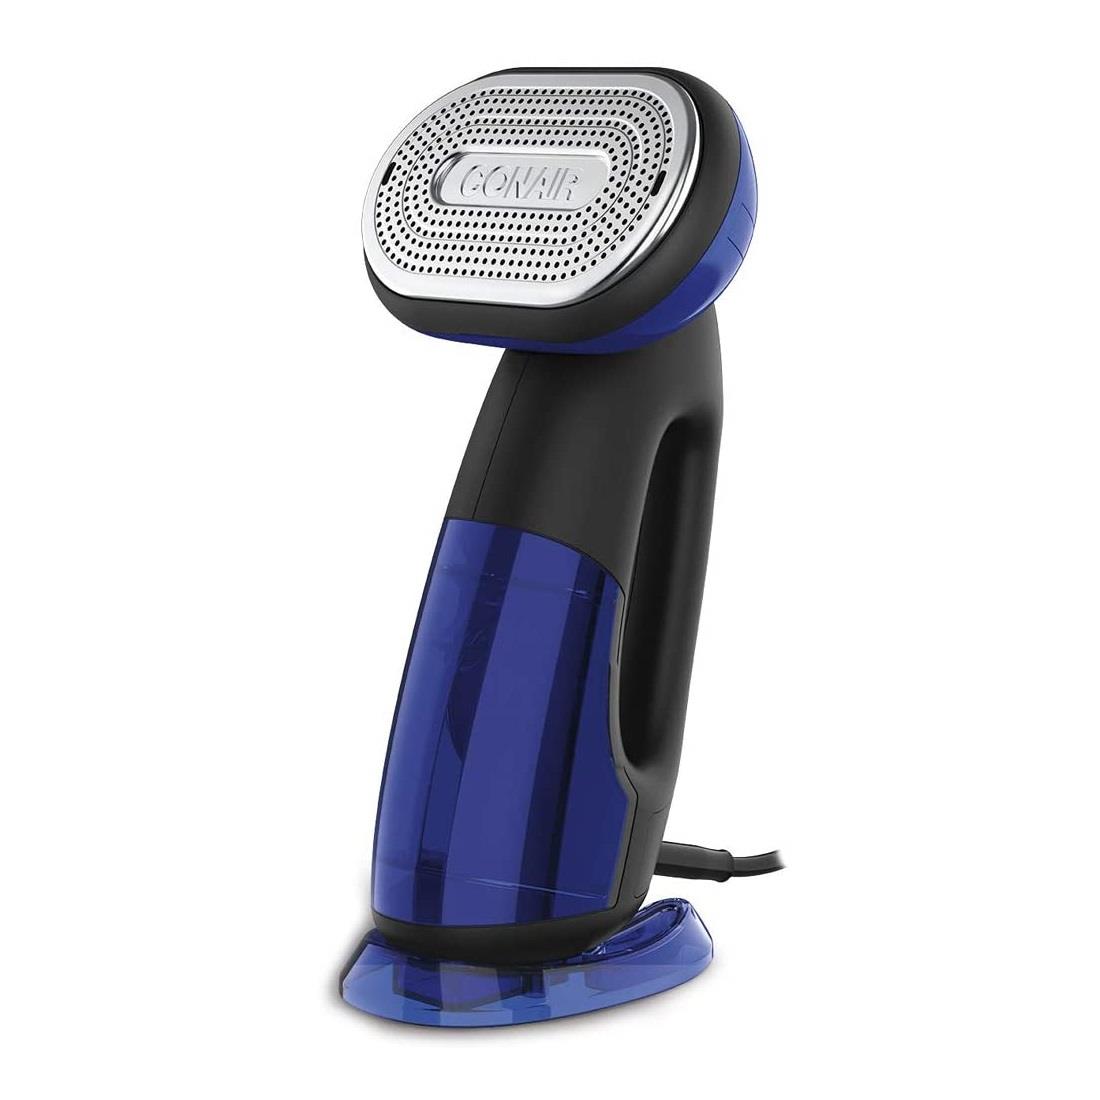 Conair Turbo Extreme Steam 2-in-1 Steamer + Iron